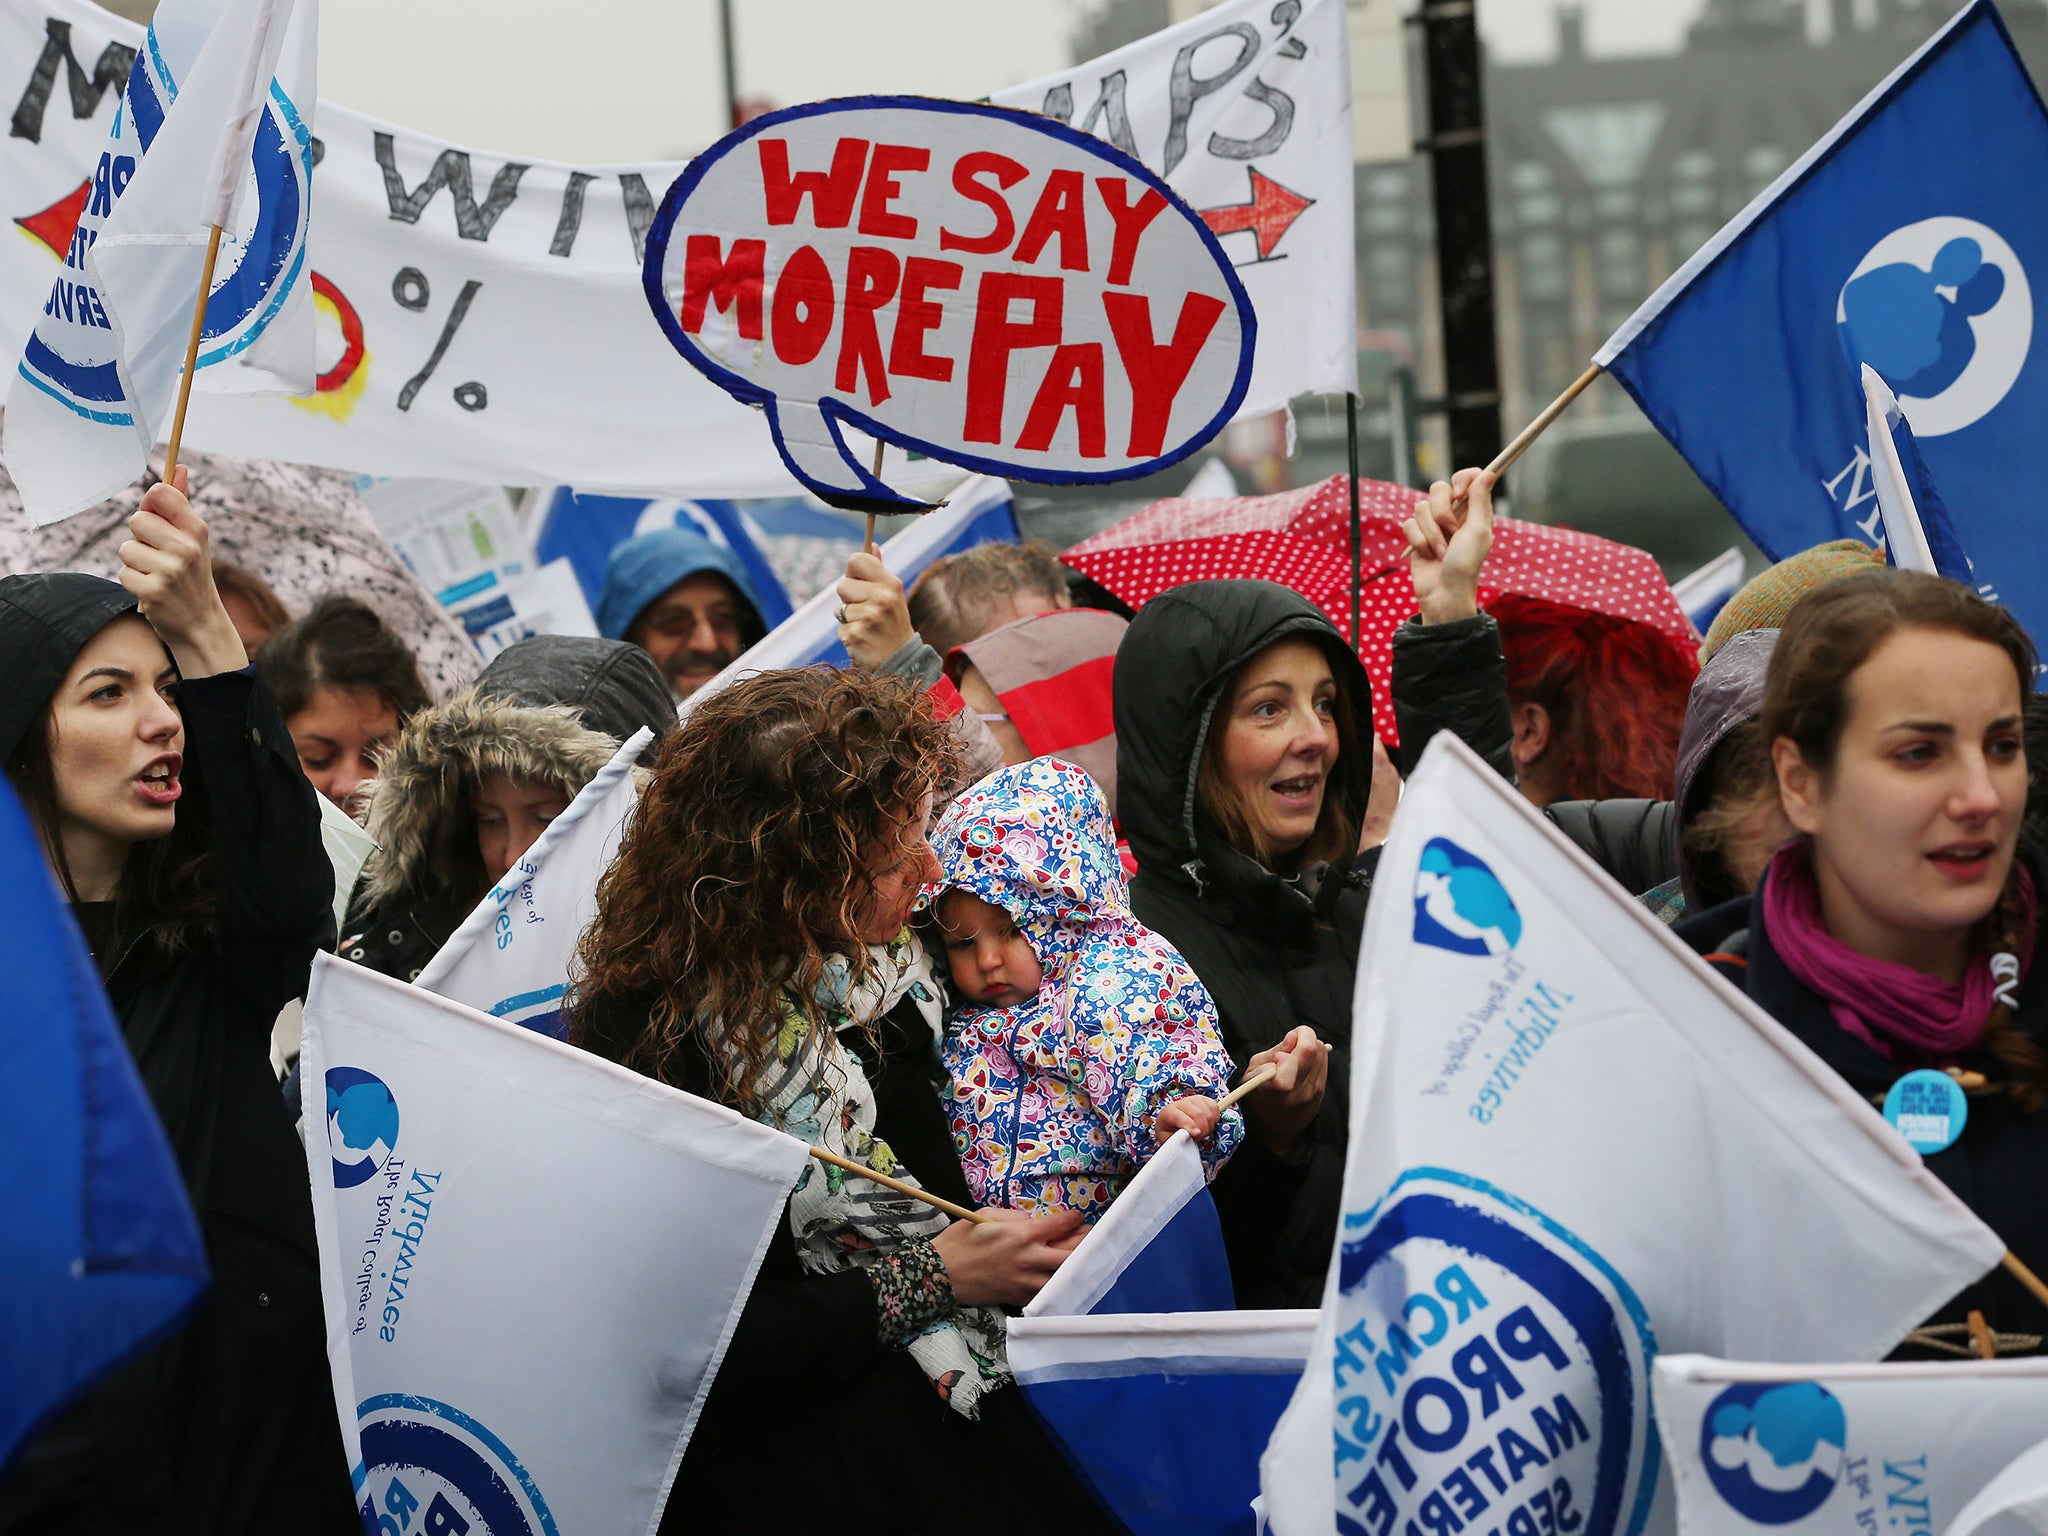 The Royal College of Midwives have said it's “premature” to threaten strike action at this time